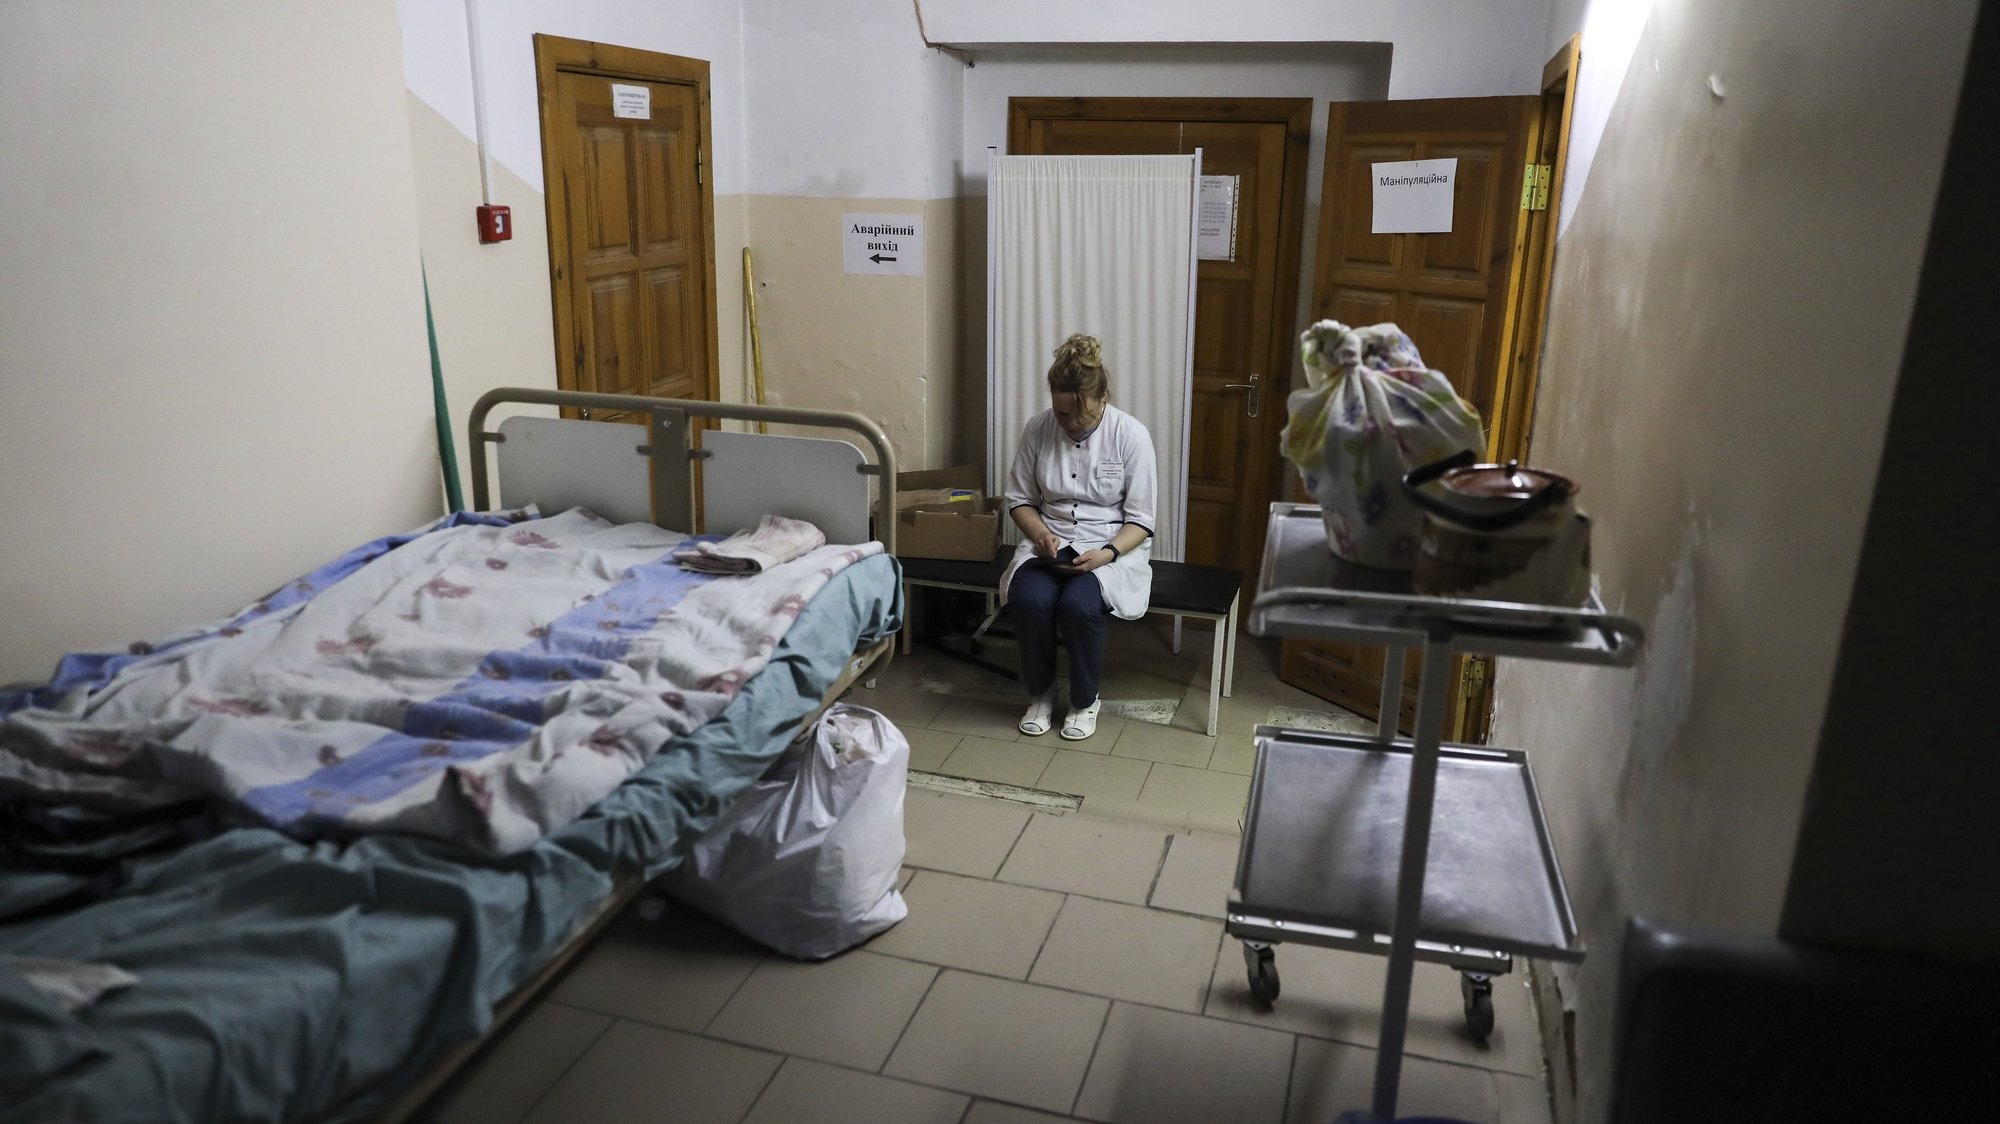 A nurse works on the shelter of the  the Zhytomyr Regional Perinatal Center in Zhytomyr, Ukrain, 20th March 2022. This Center was bombarded on the early morning of 2th of March. Russian troops entered Ukraine on 24 February prompting the country&#039;s president to declare martial law and triggering a series of announcements by Western countries to impose severe economic sanctions on Russia. MIGUEL A. LOPES/LUSA